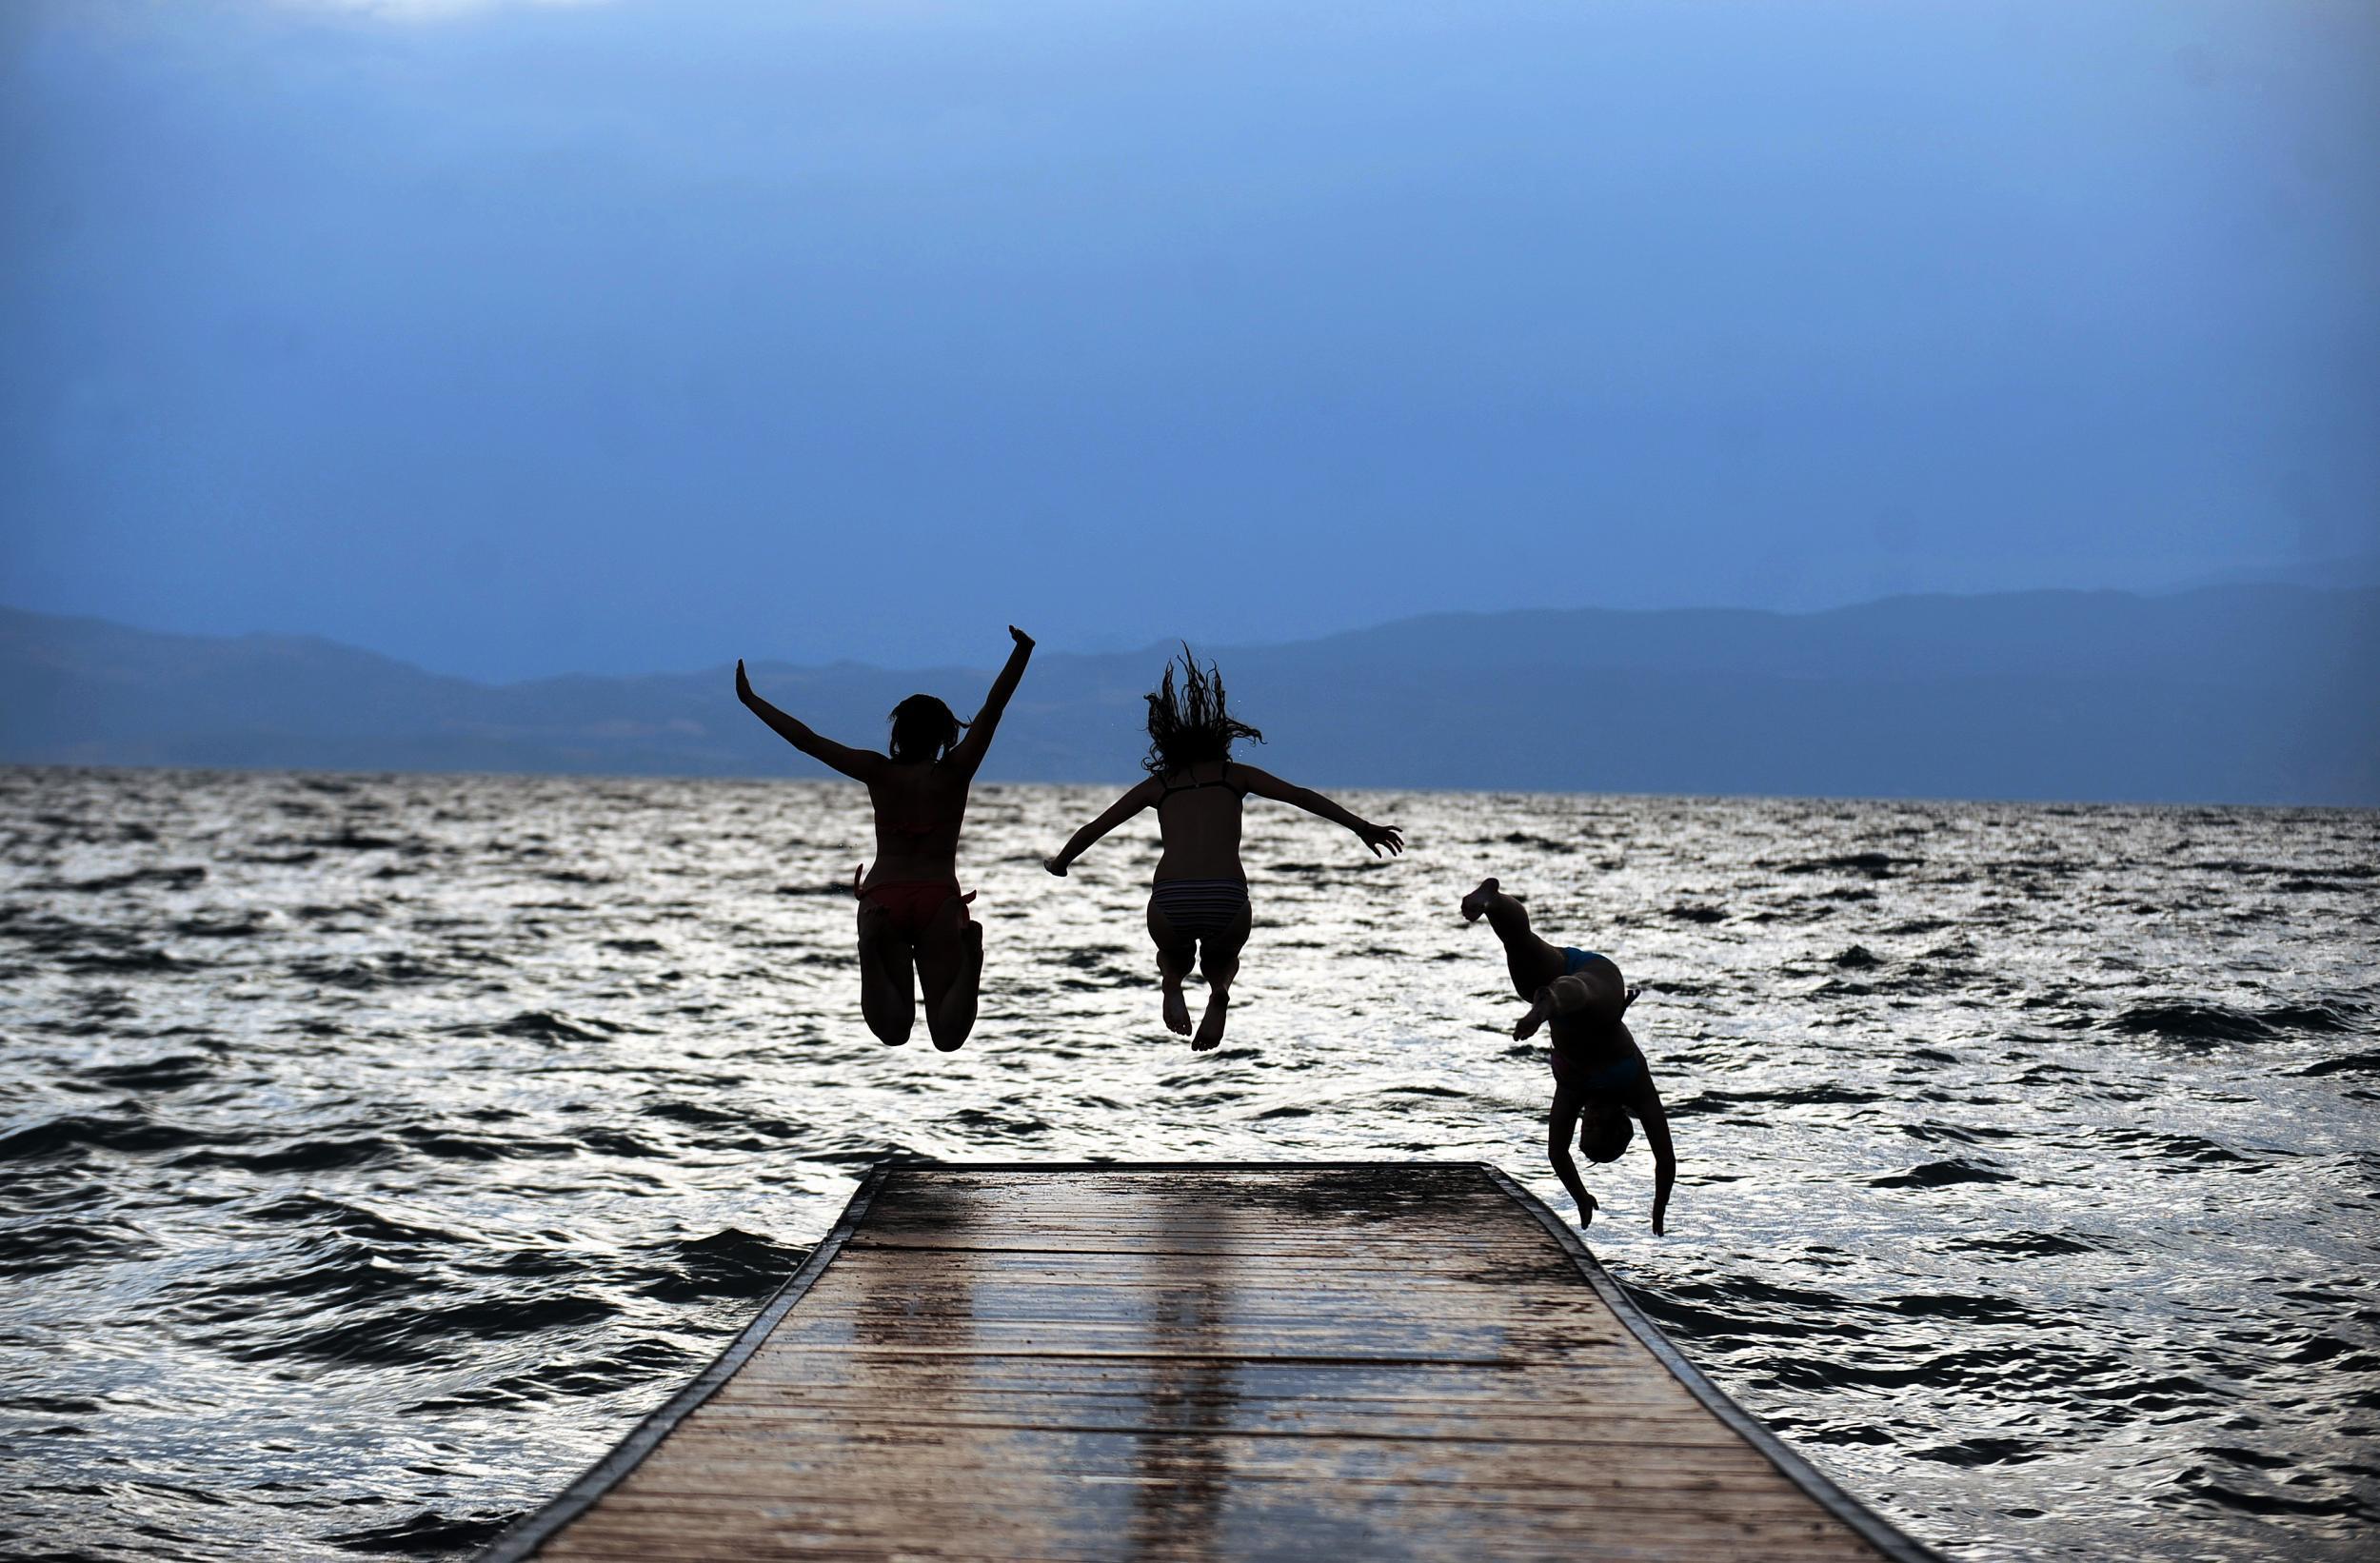 Lake Ohrid is a budget but beautiful option for a summer break